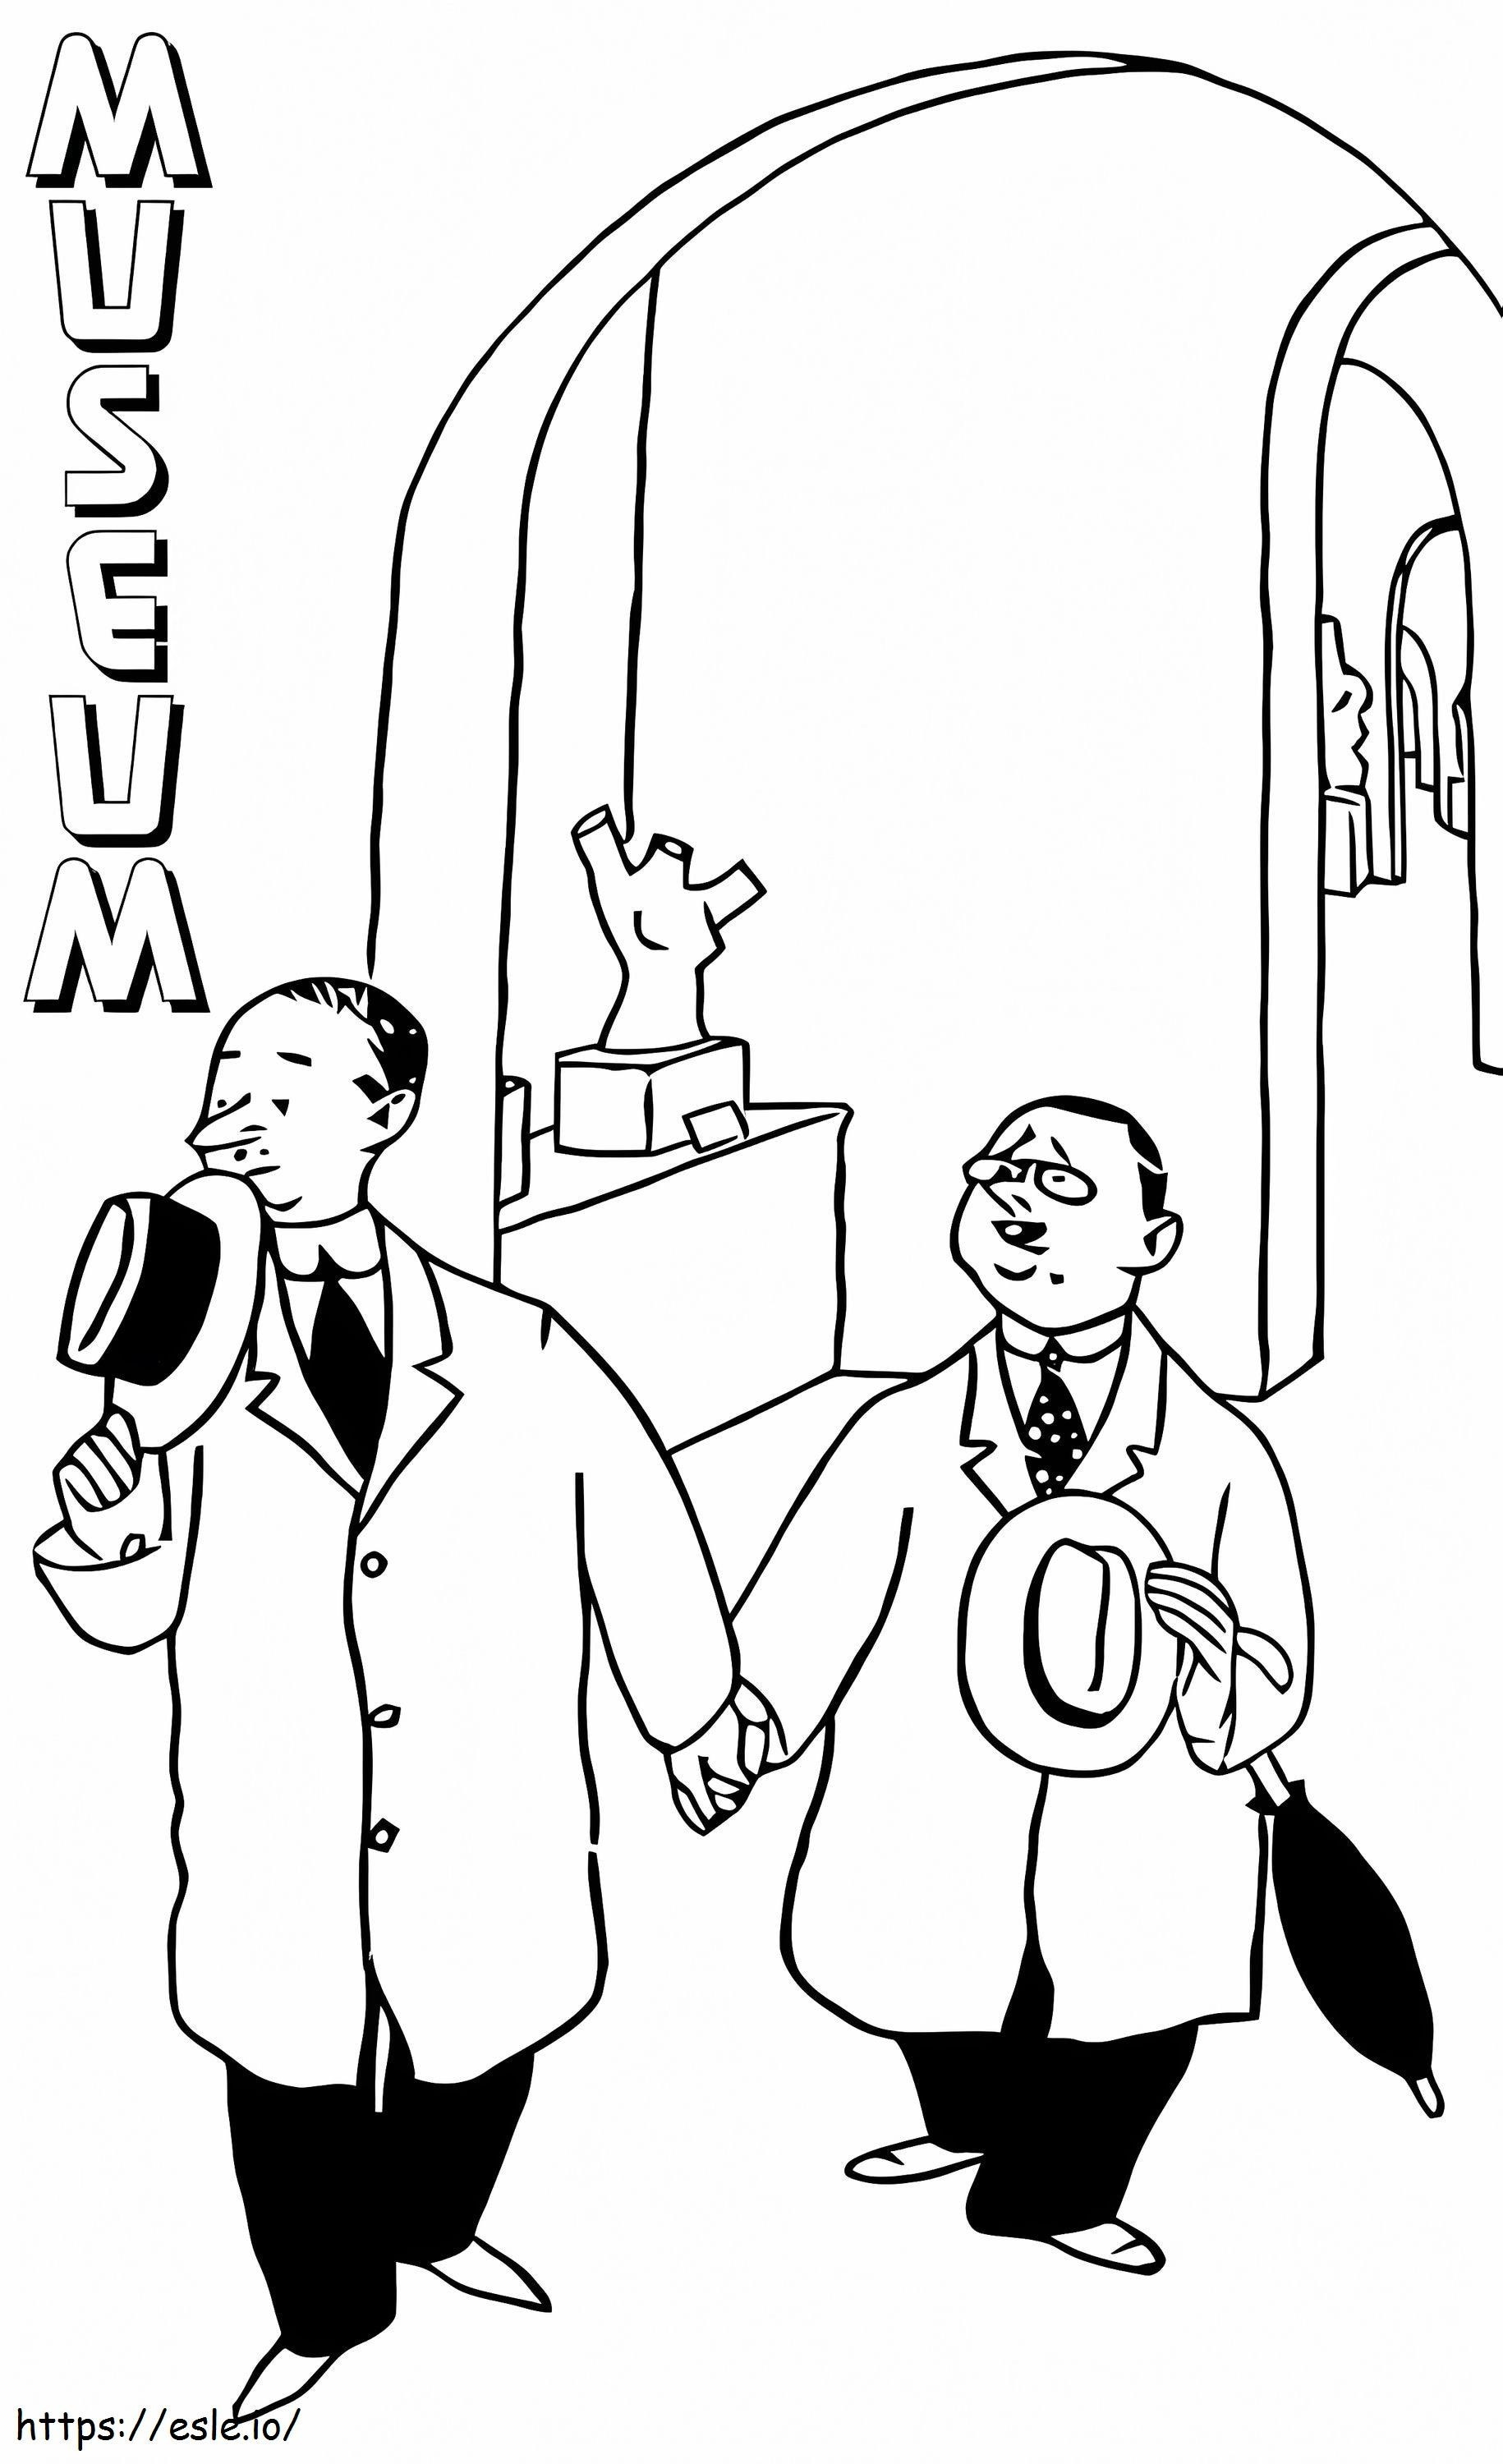 In The Museum coloring page